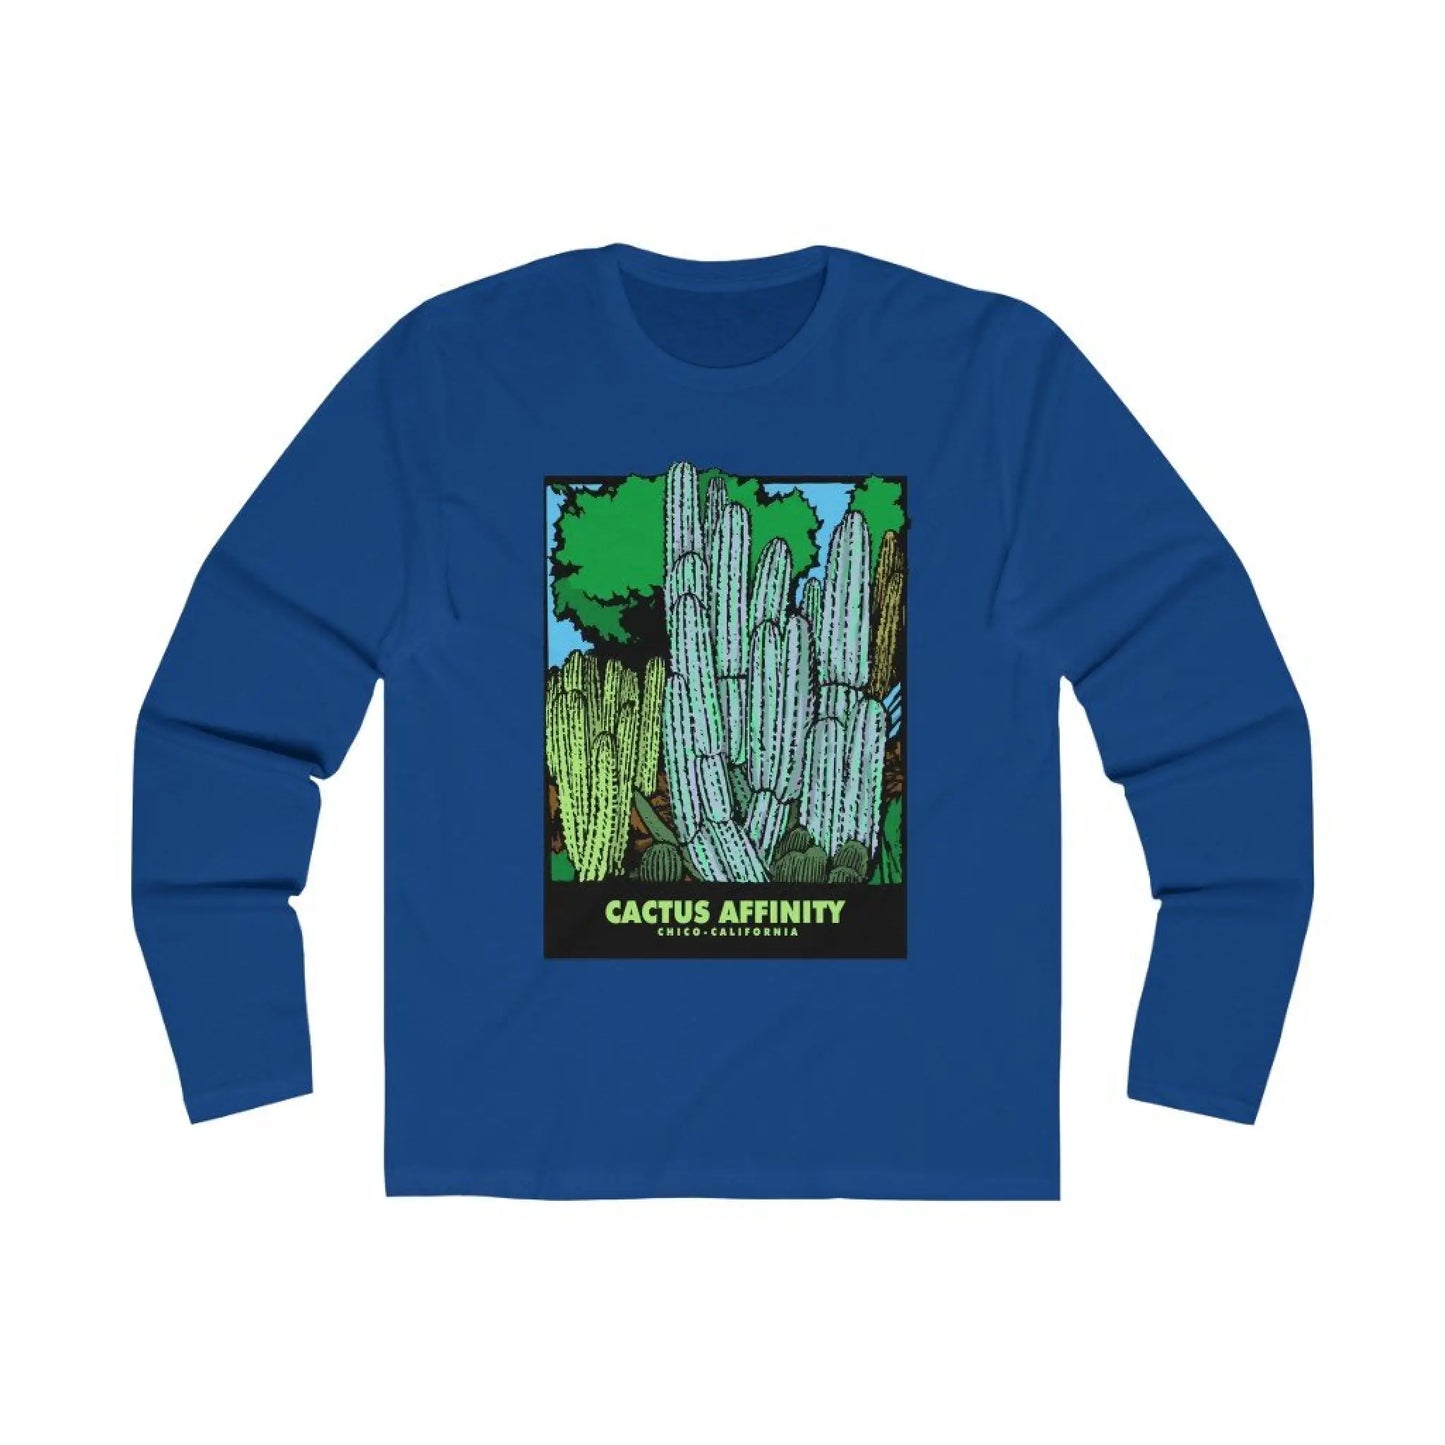 Men’s Long Sleeve Crew Tee - Chico - Solid Royal / S -